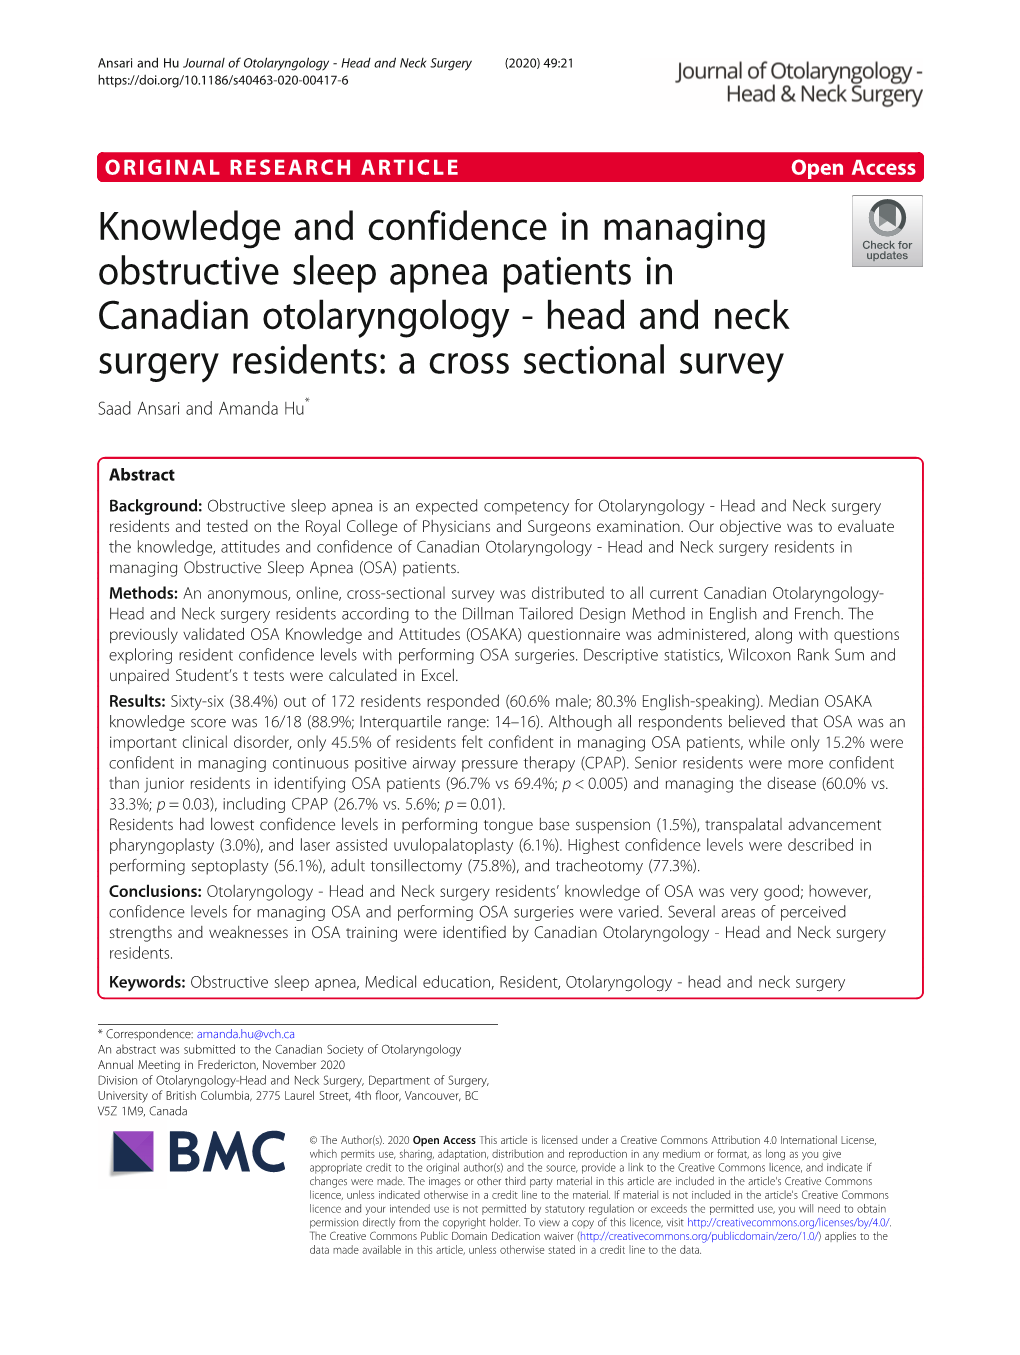 Knowledge and Confidence in Managing Obstructive Sleep Apnea